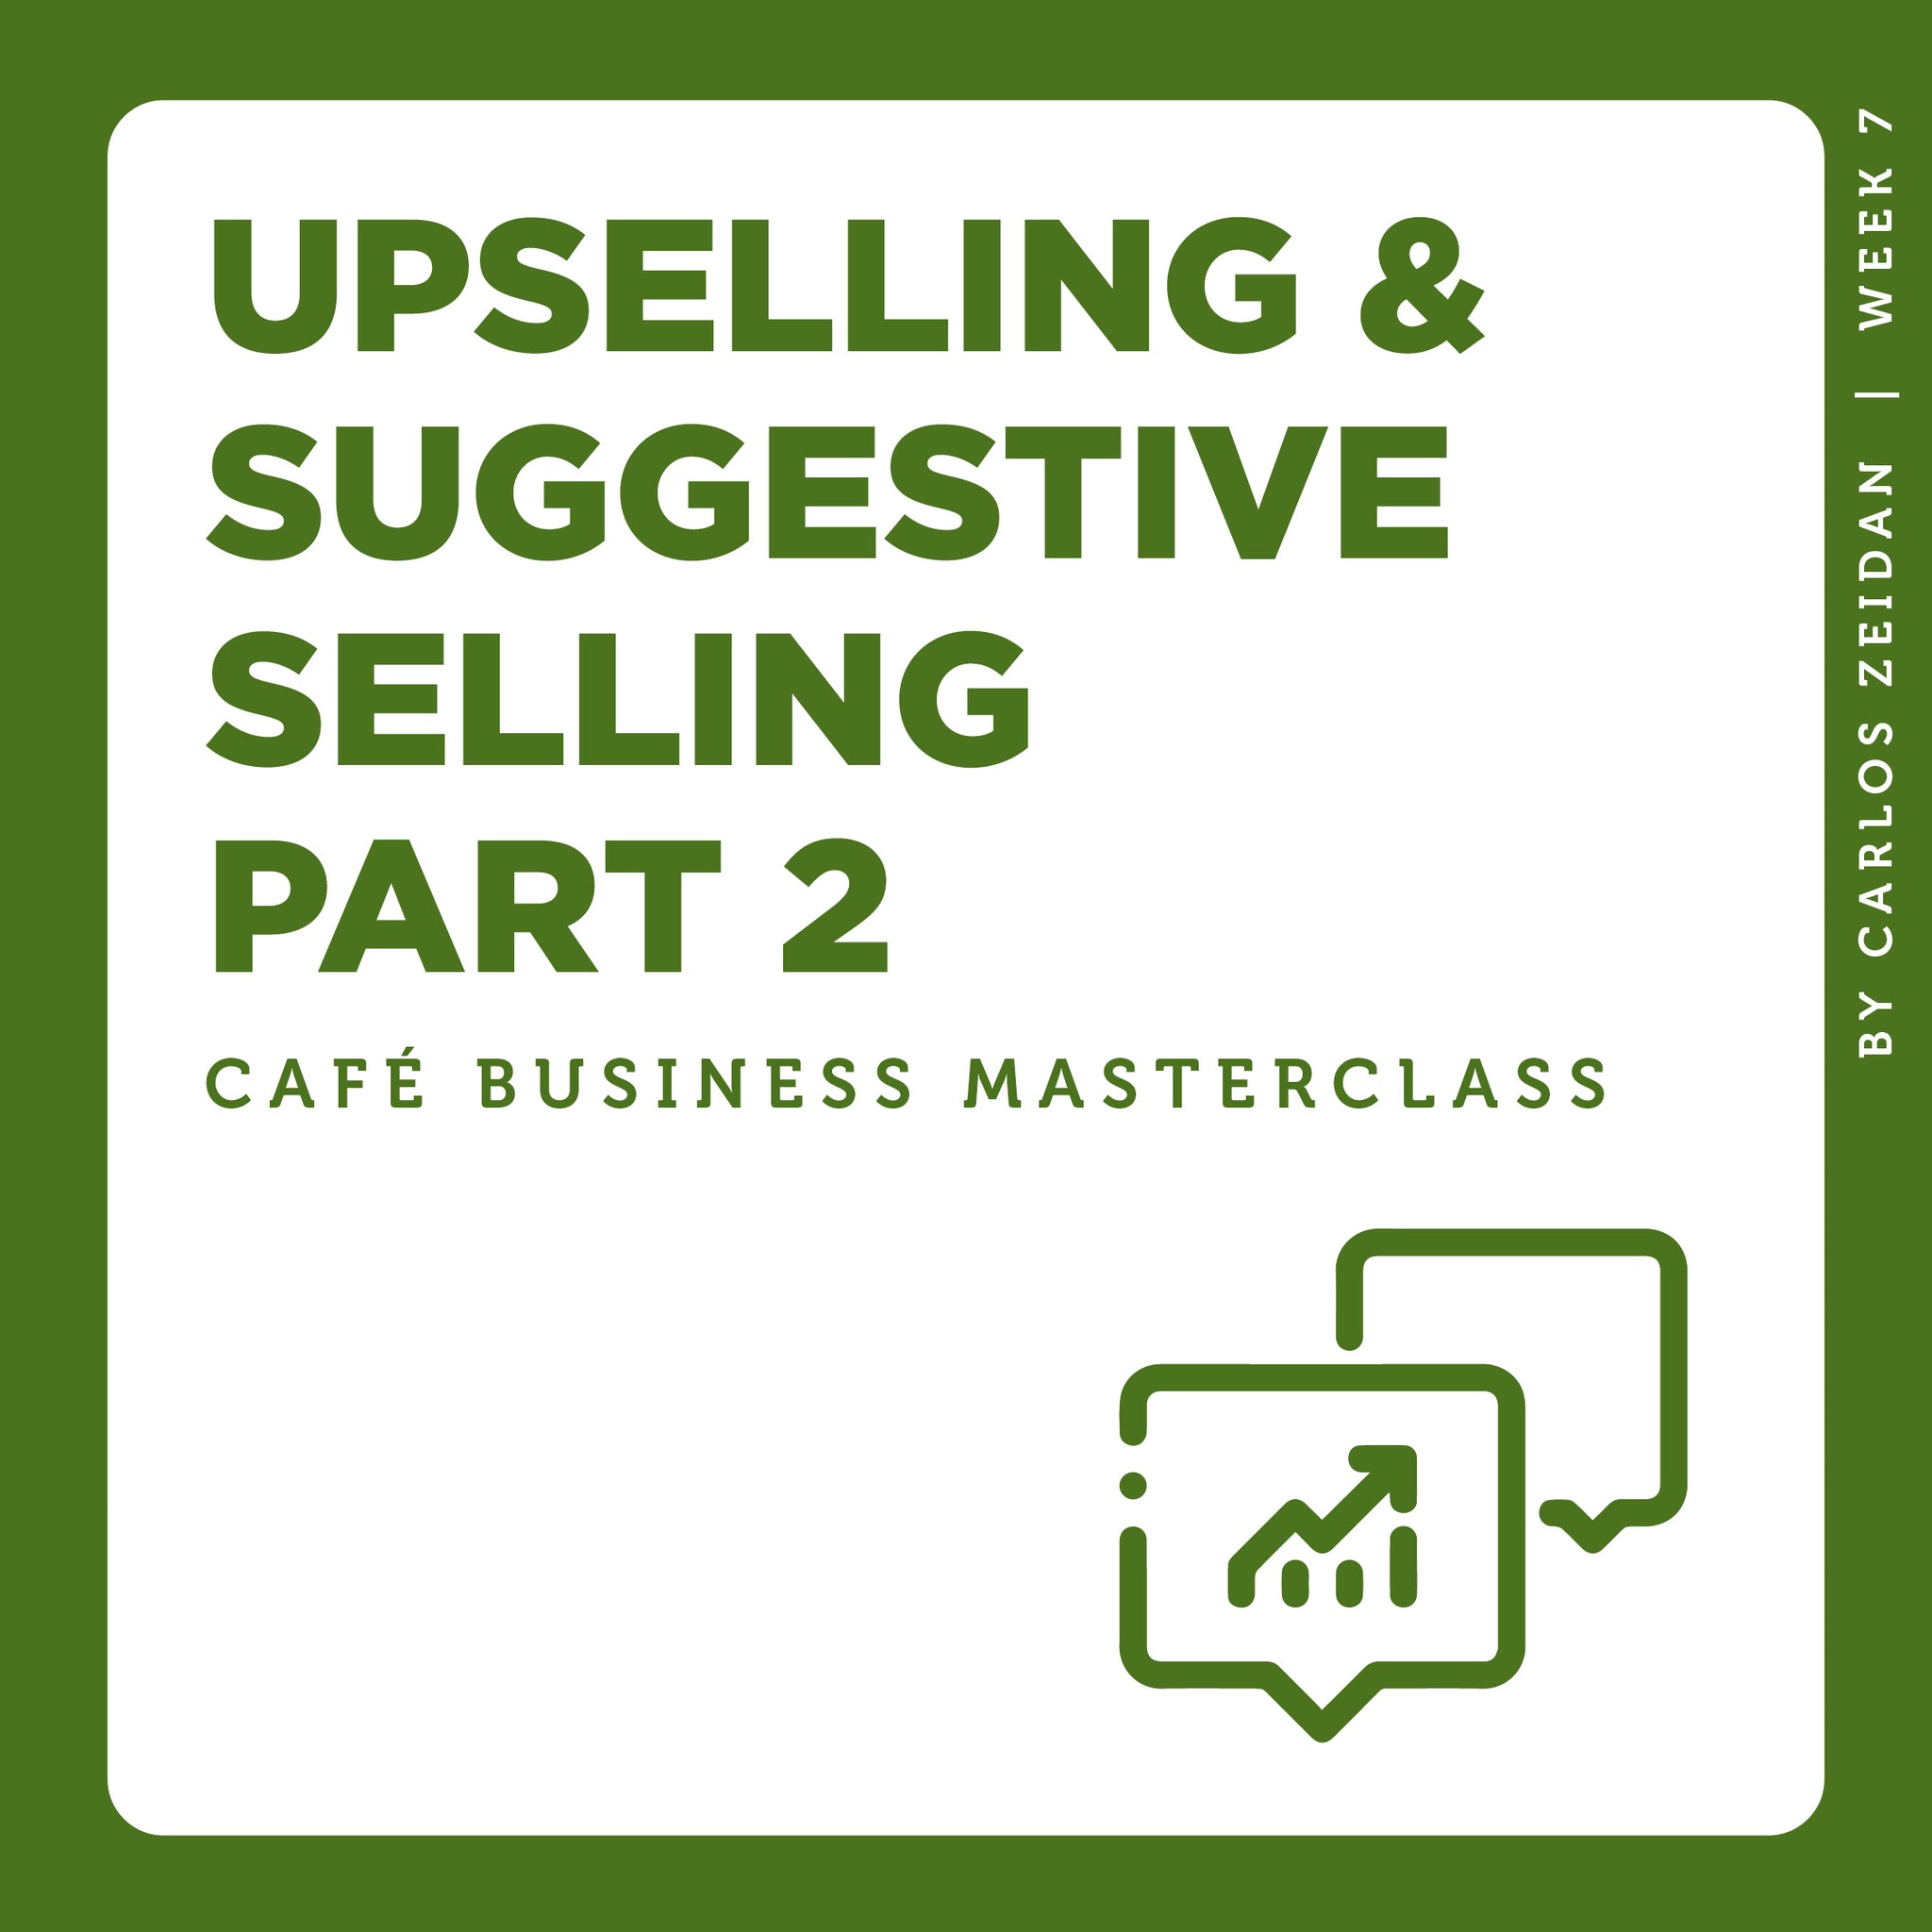 Café Business Masterclass: Upselling & Suggestive Selling Part 2